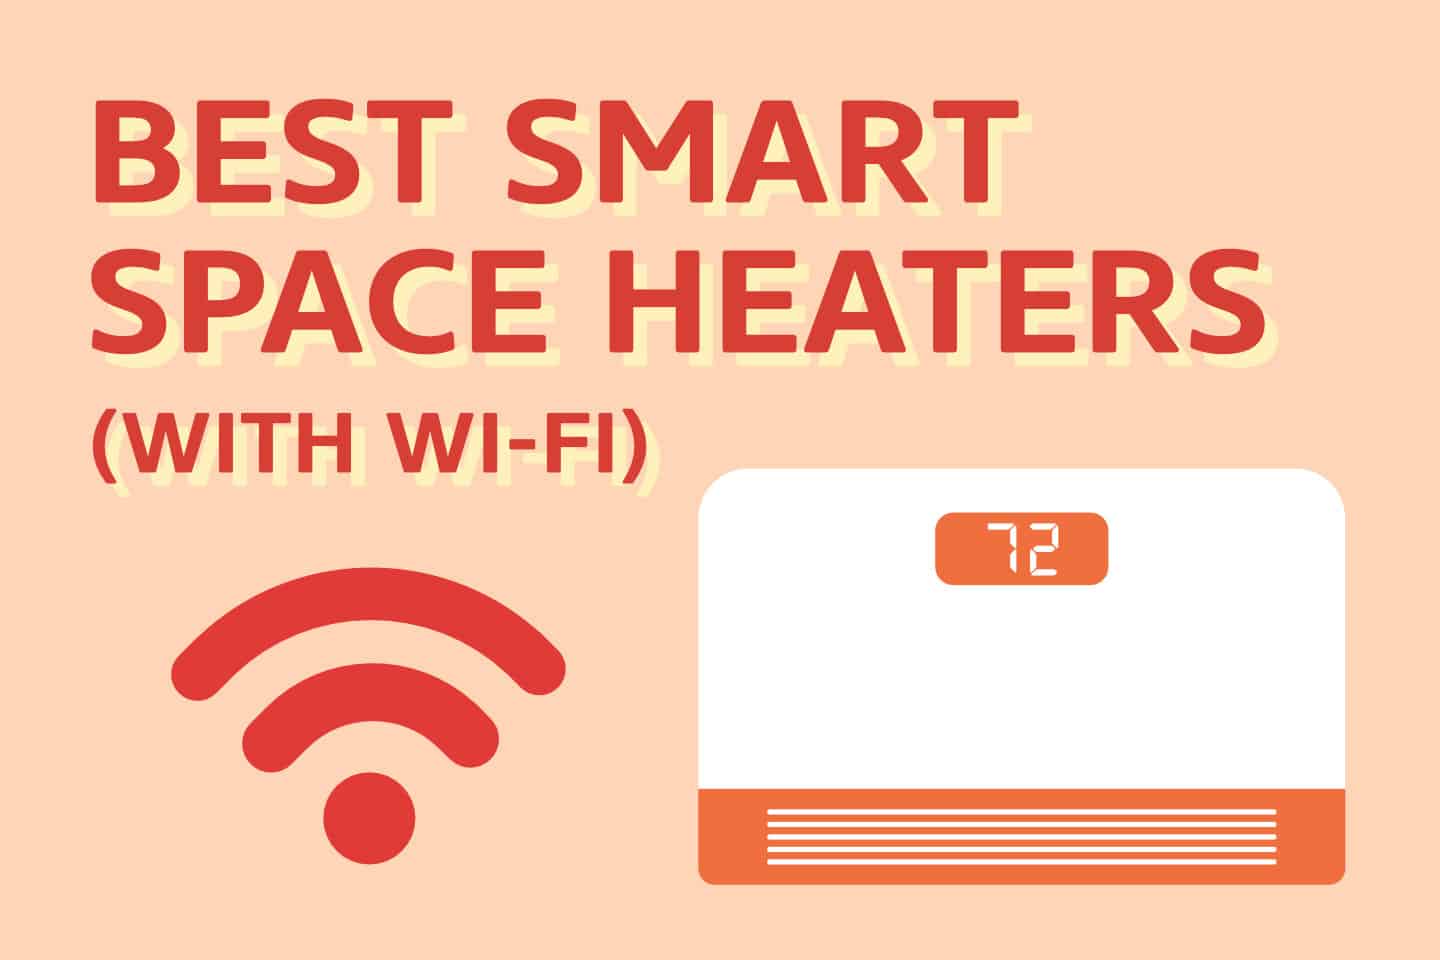 6 Best Smart Space Heaters [with Wi-Fi]